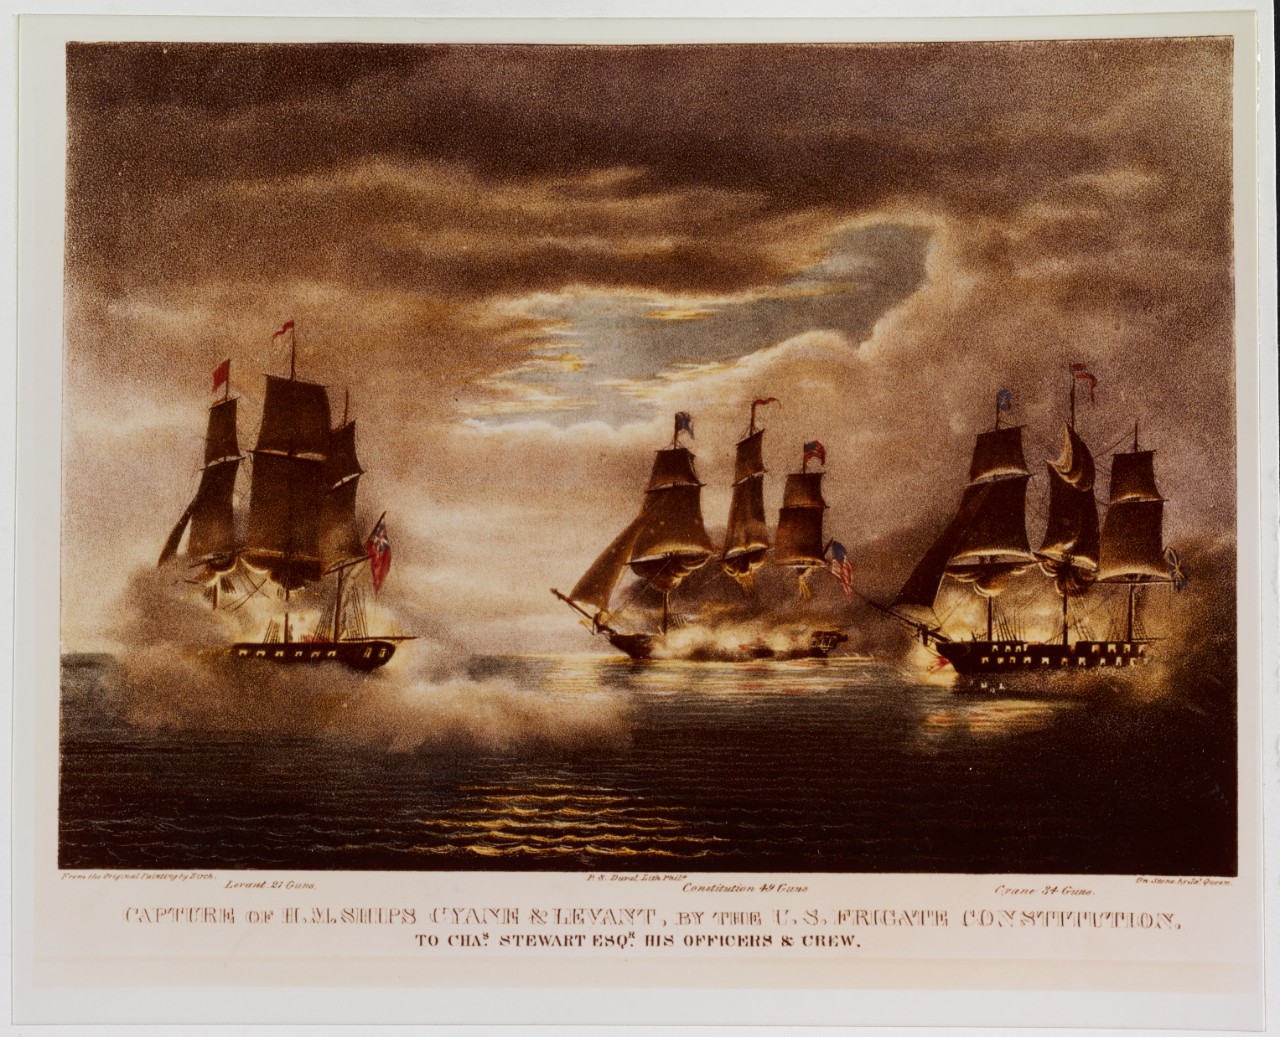 Photo #: NH 86692-KN &quot;Capture of H.M. Ships Cyane &amp; Levant, by the U.S. Frigate Constitution&quot;, 20 February 1815